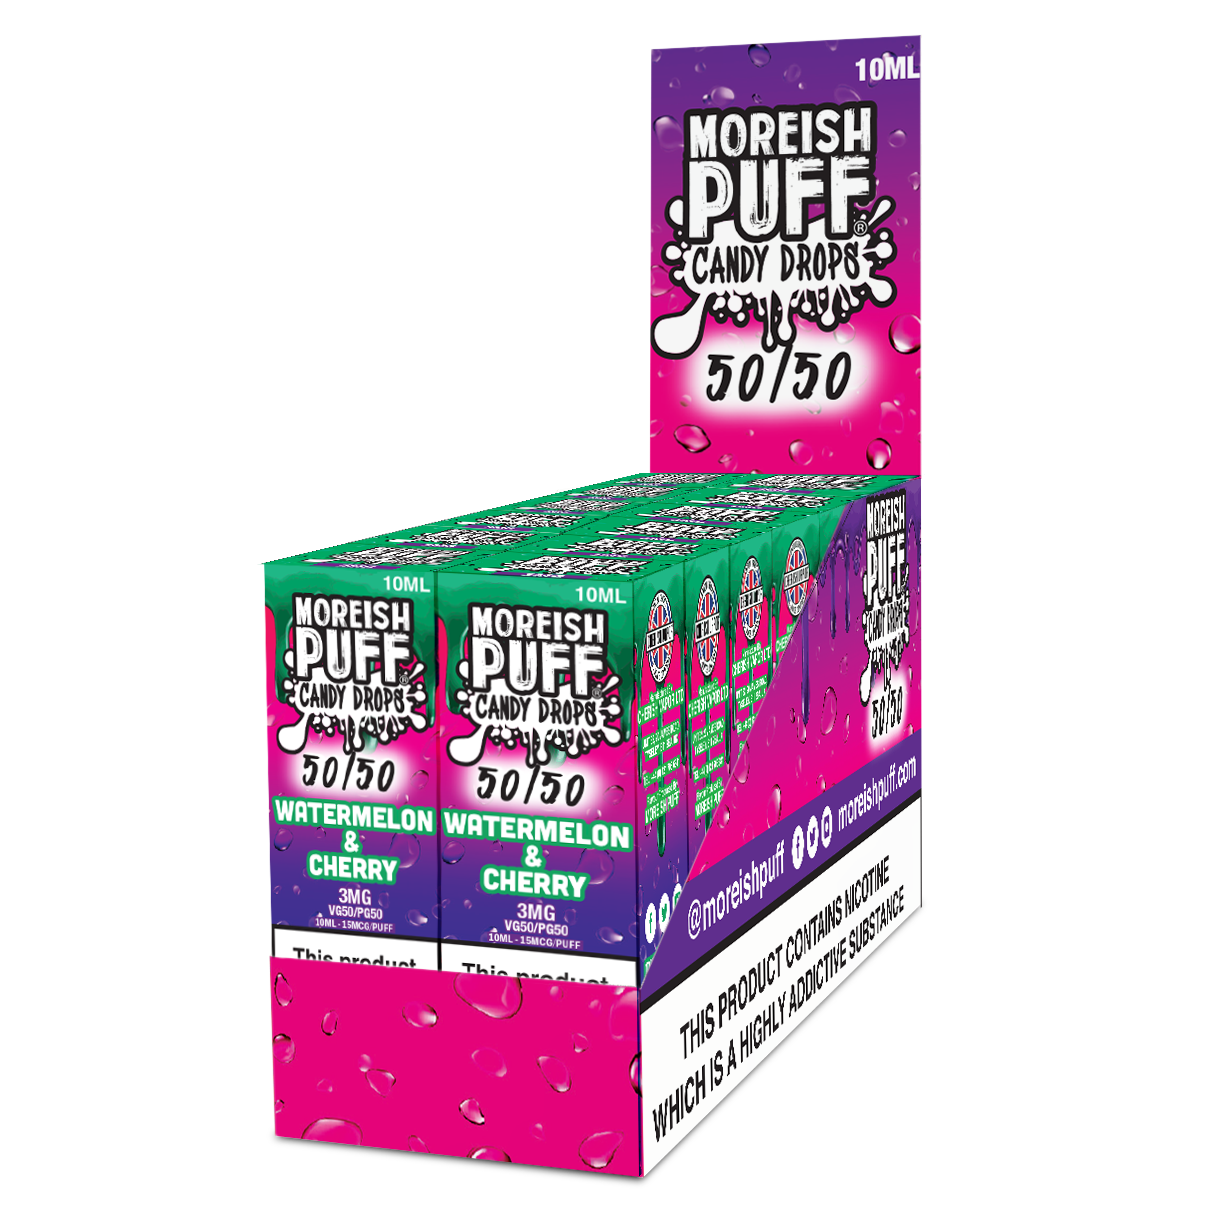 Moreish Puff Candy Drops 50/50: Watermelon and Cherry Candy Drops 10ml E-Liquid